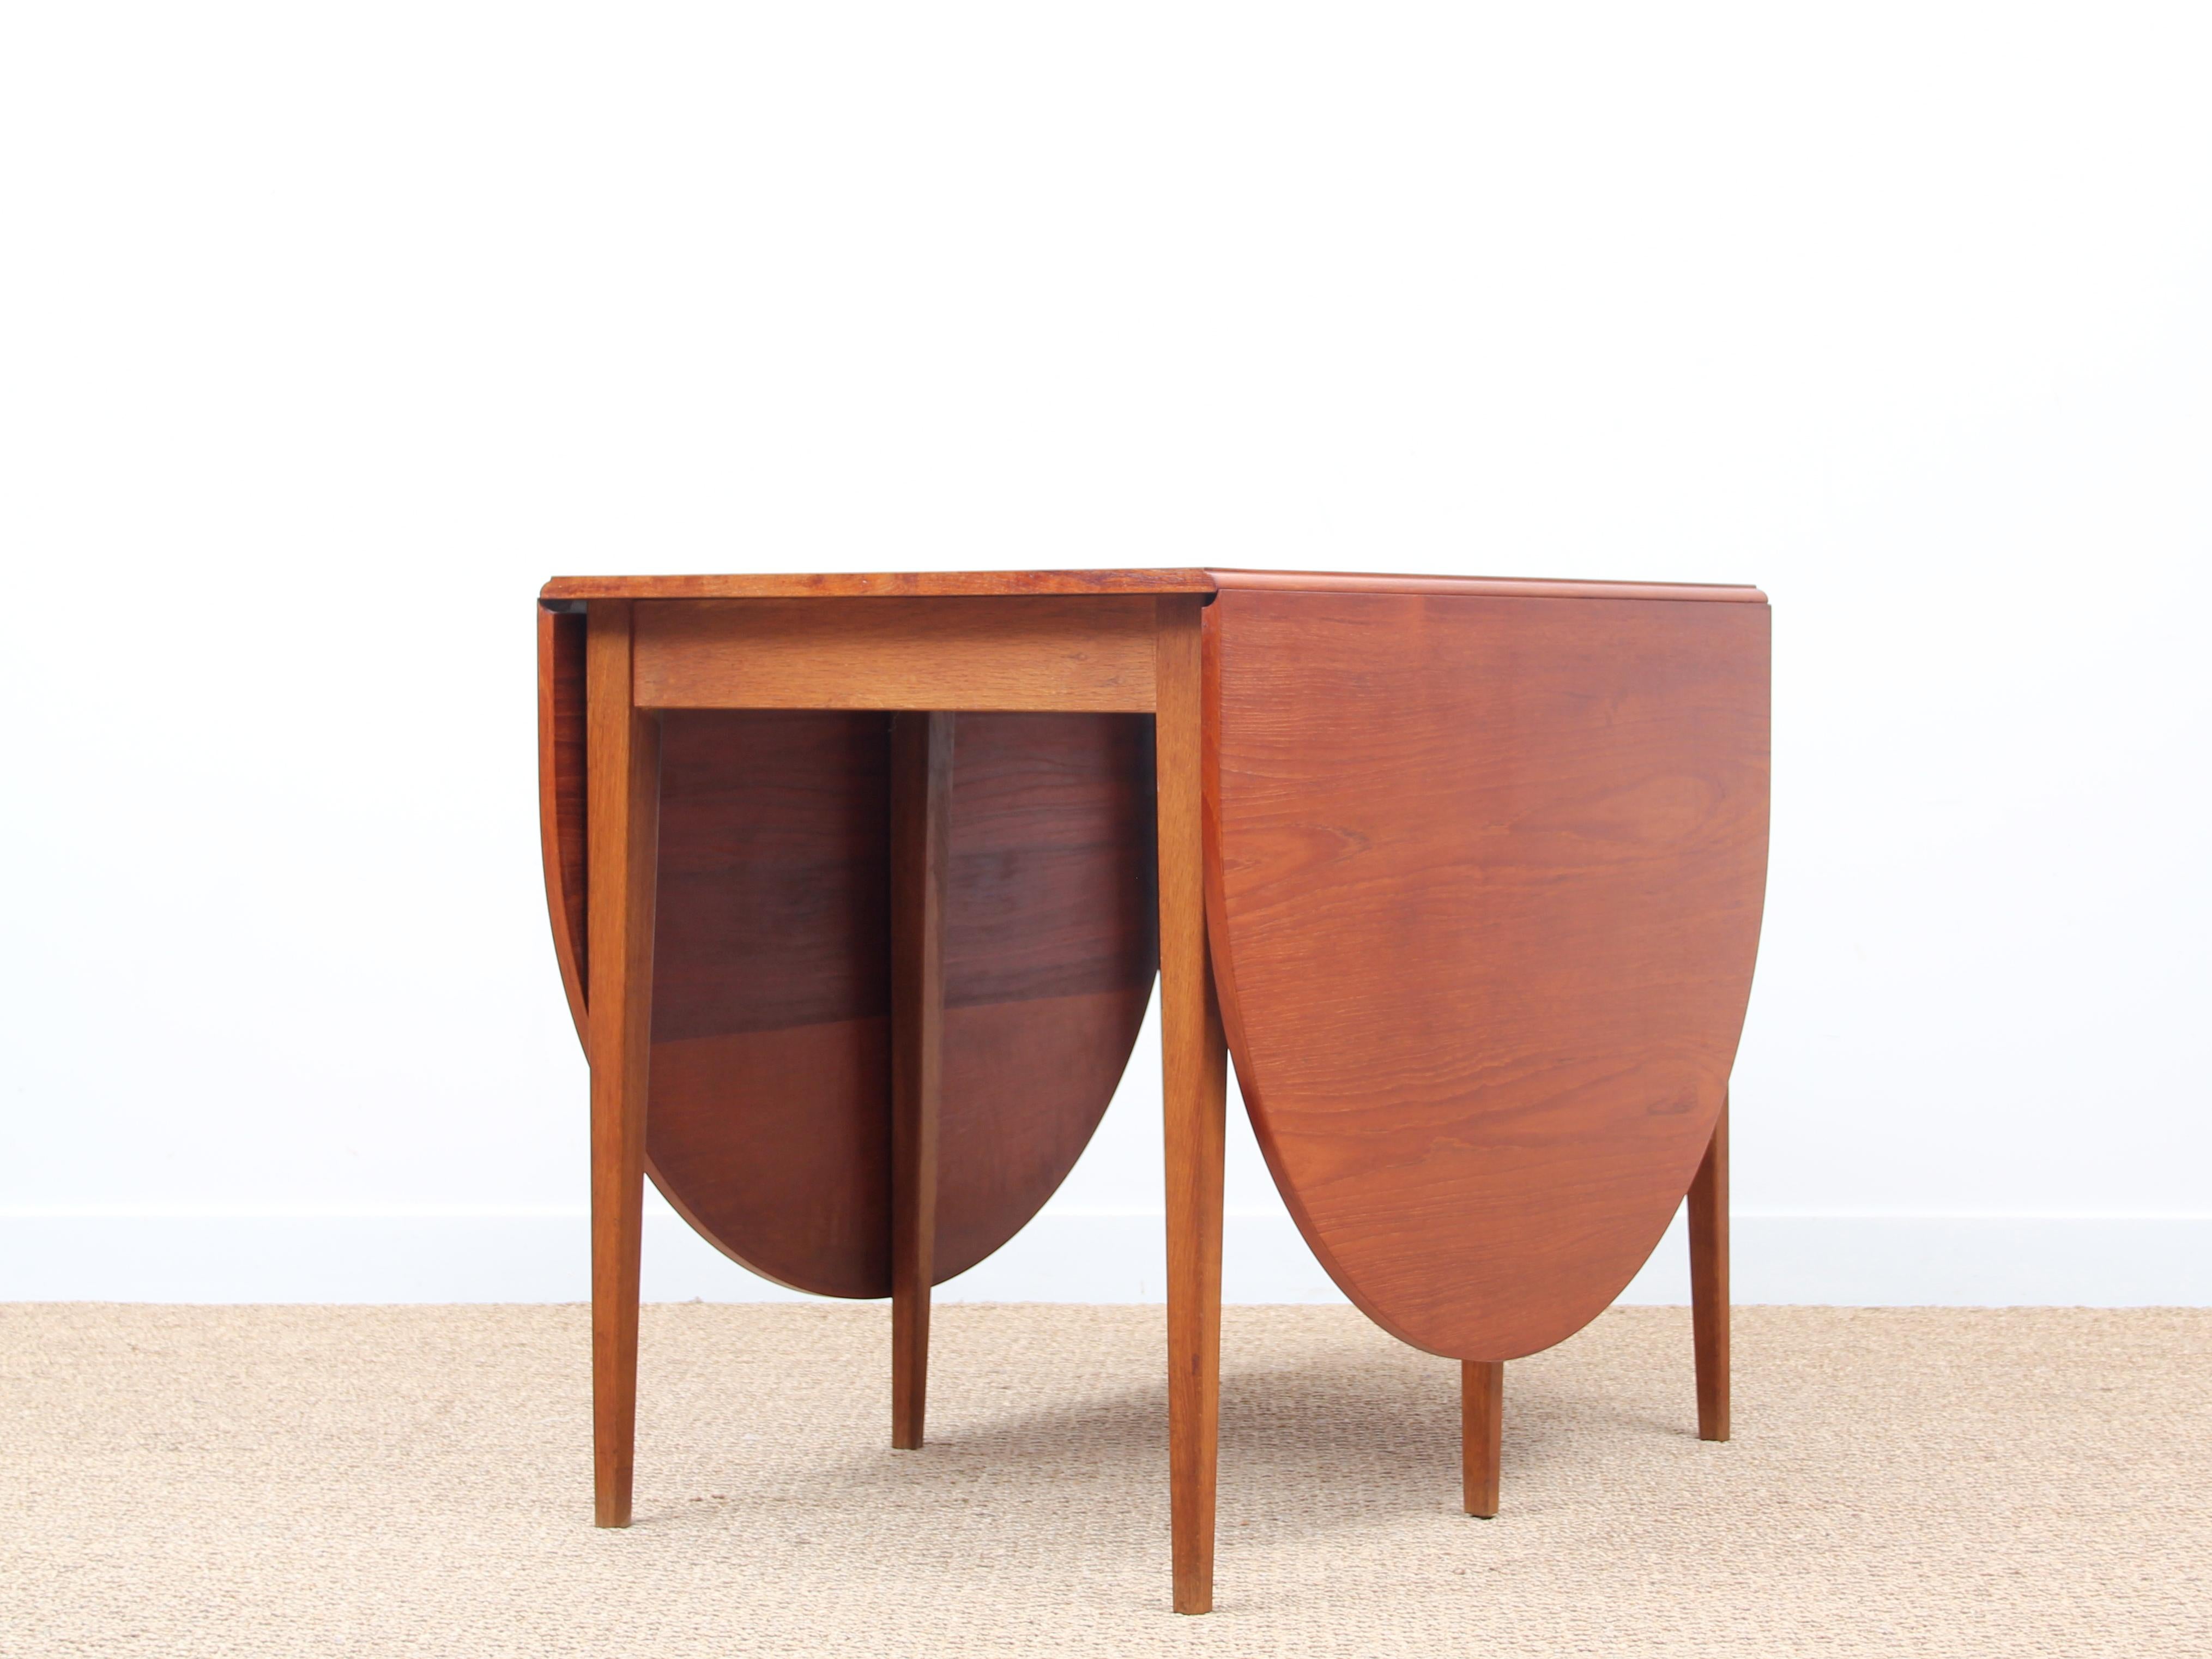 Mid-20th Century Mid-Century Modern Scandinavian Dining Table Flap Table in Teak and Oak for 2-6